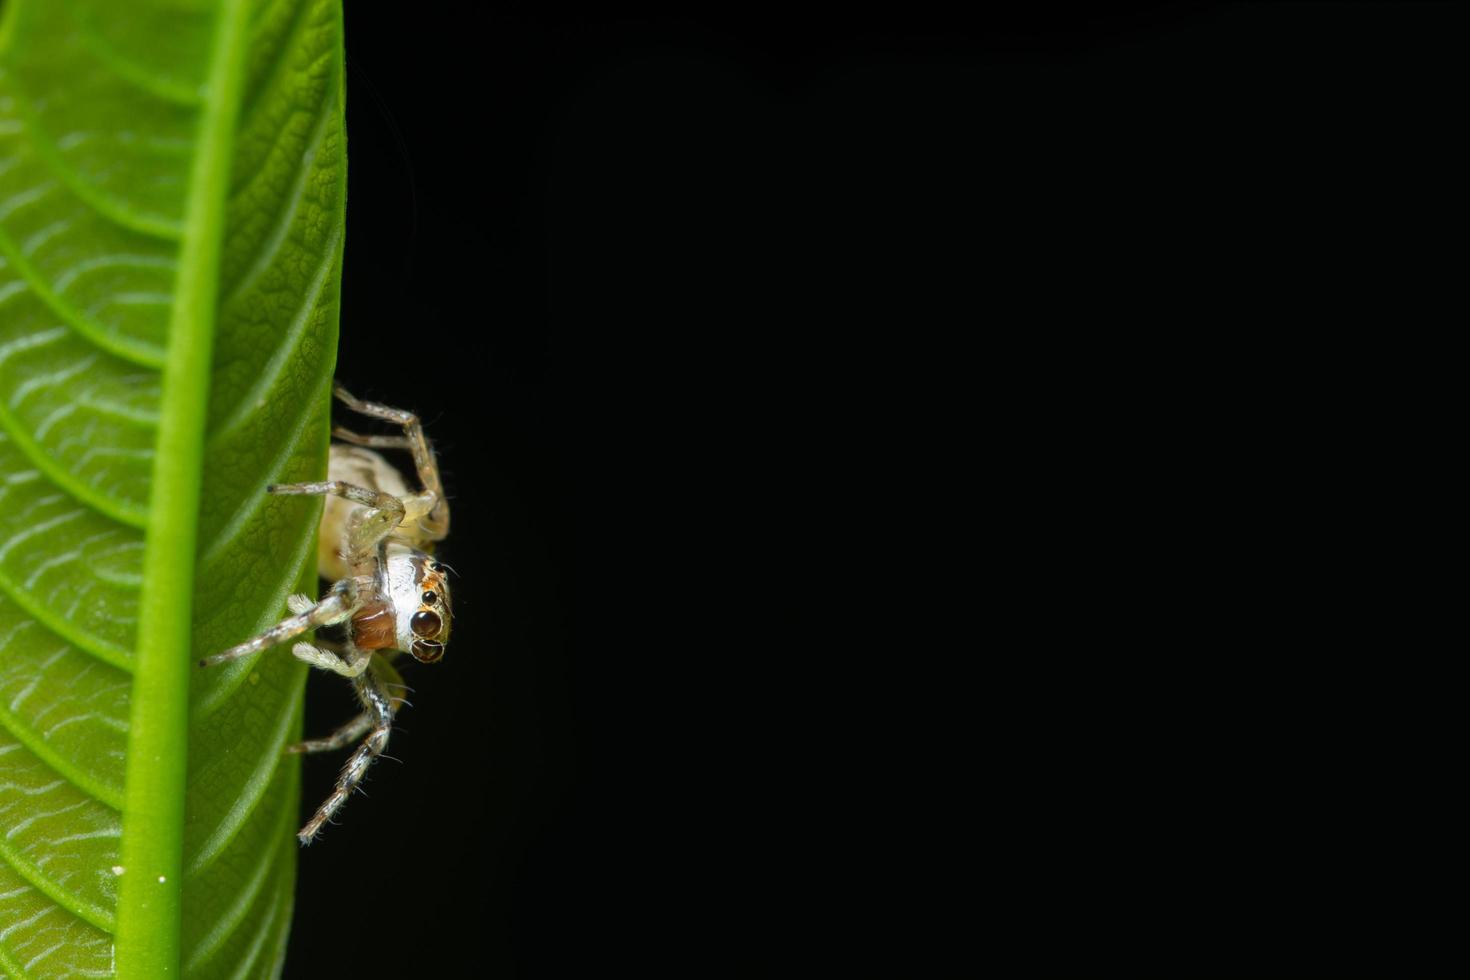 Spider on a leaf, close-up photo